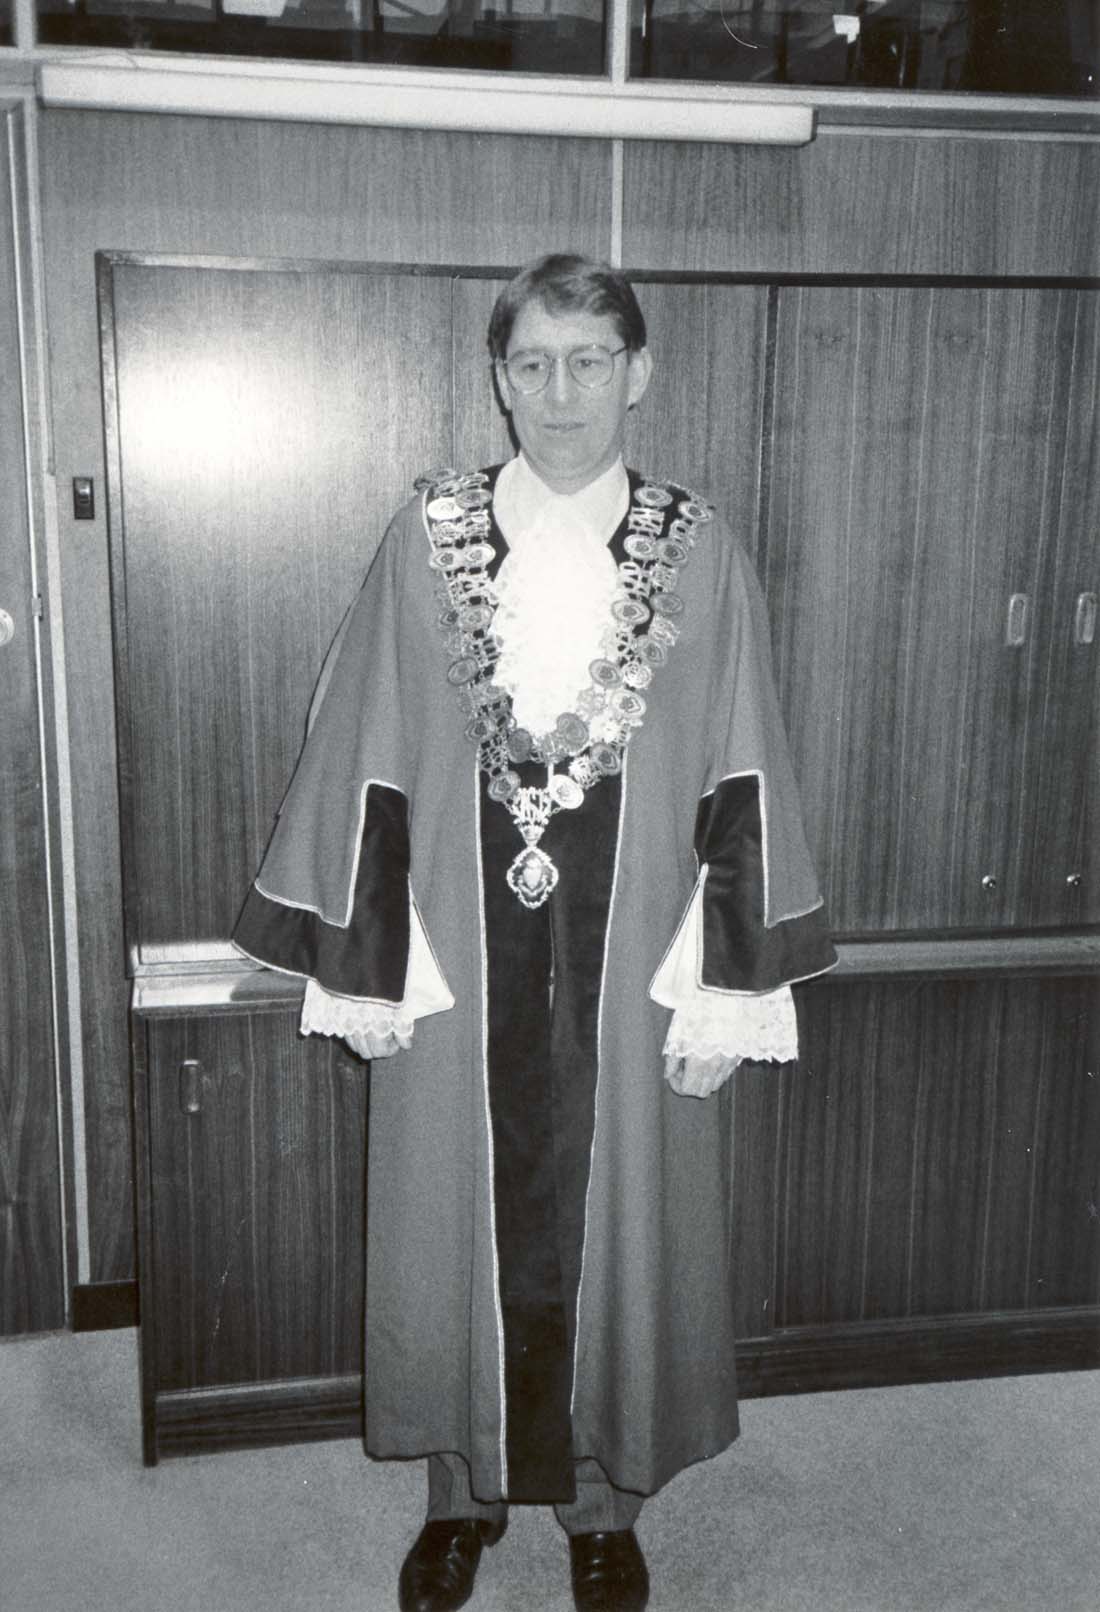 Image of Phillip Bain in his Mayoral robes